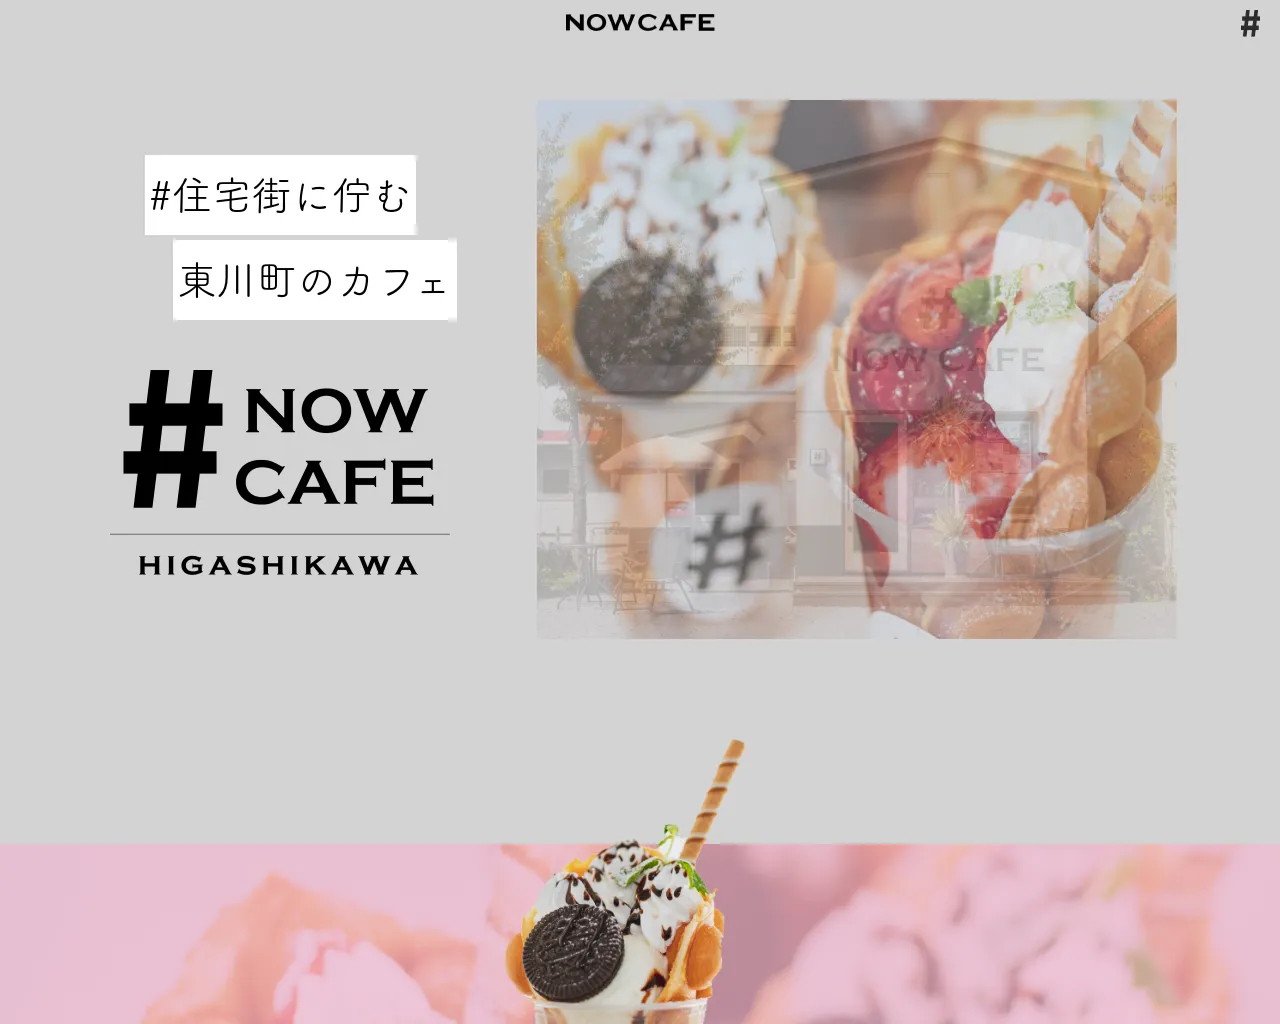 # NOW CAFE site